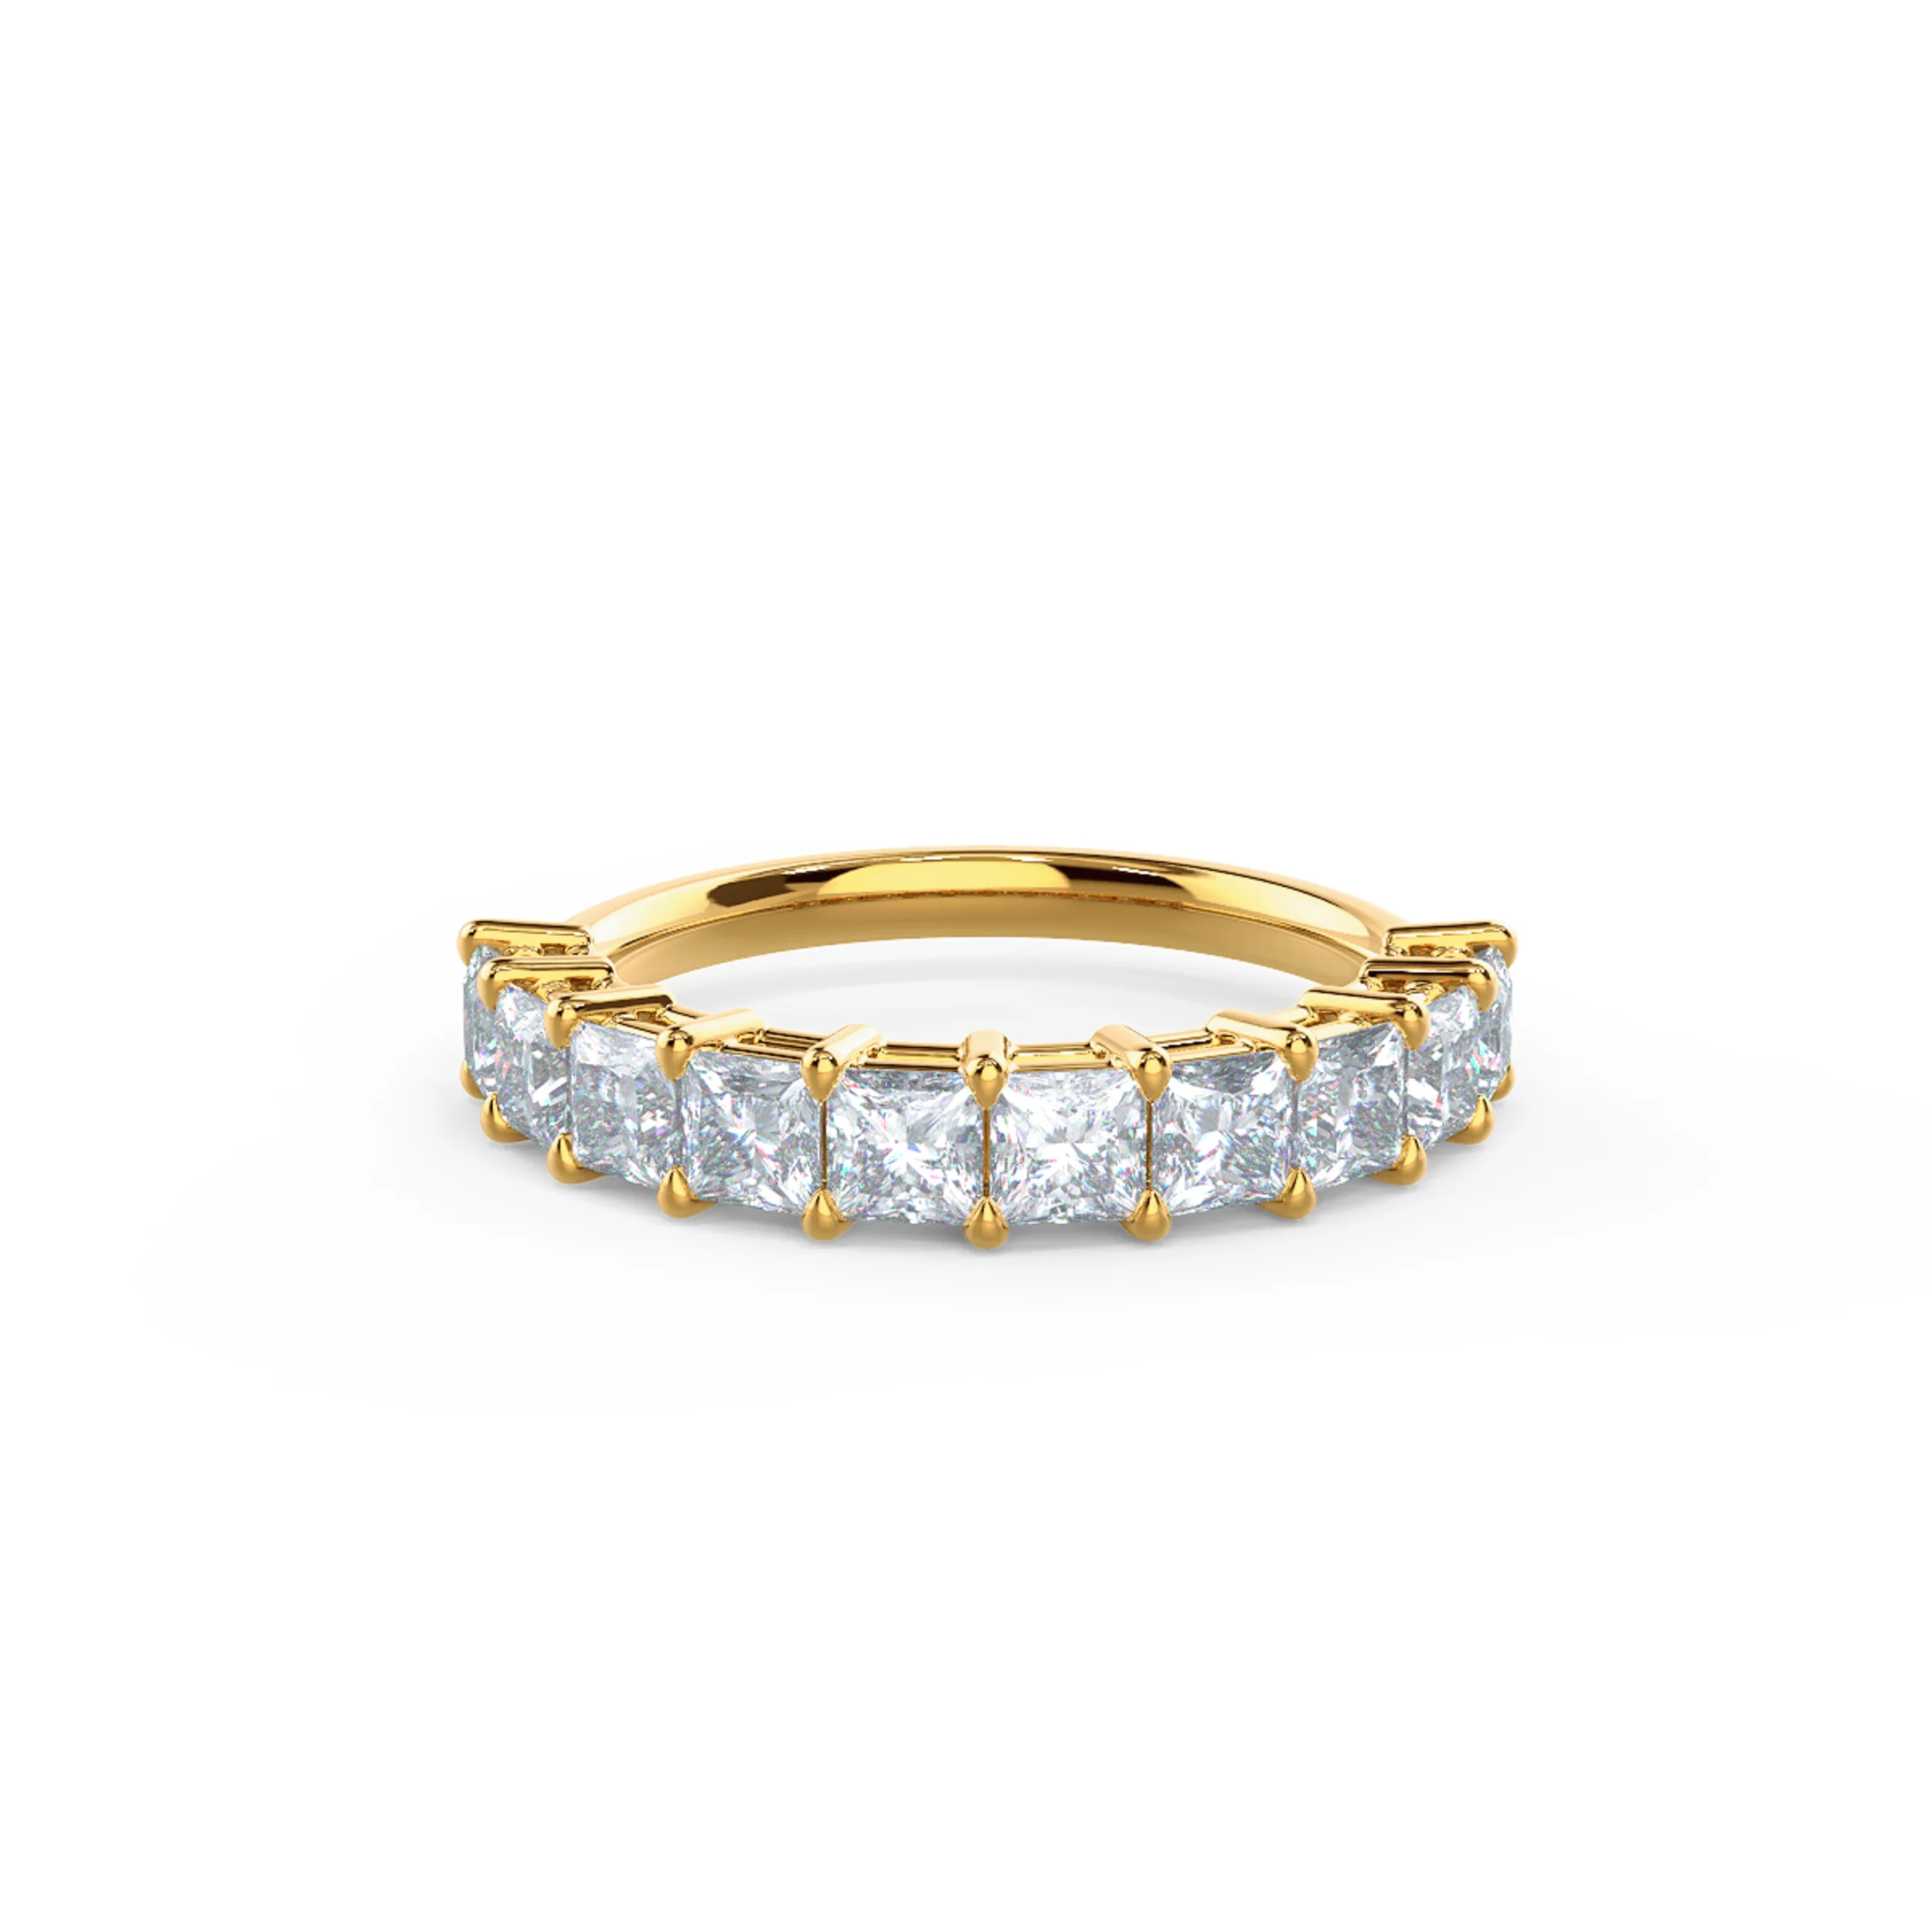 Exceptional Quality 2.1 ct Lab Grown Diamonds set in 14k Yellow Gold Princess Half Band (Main View)